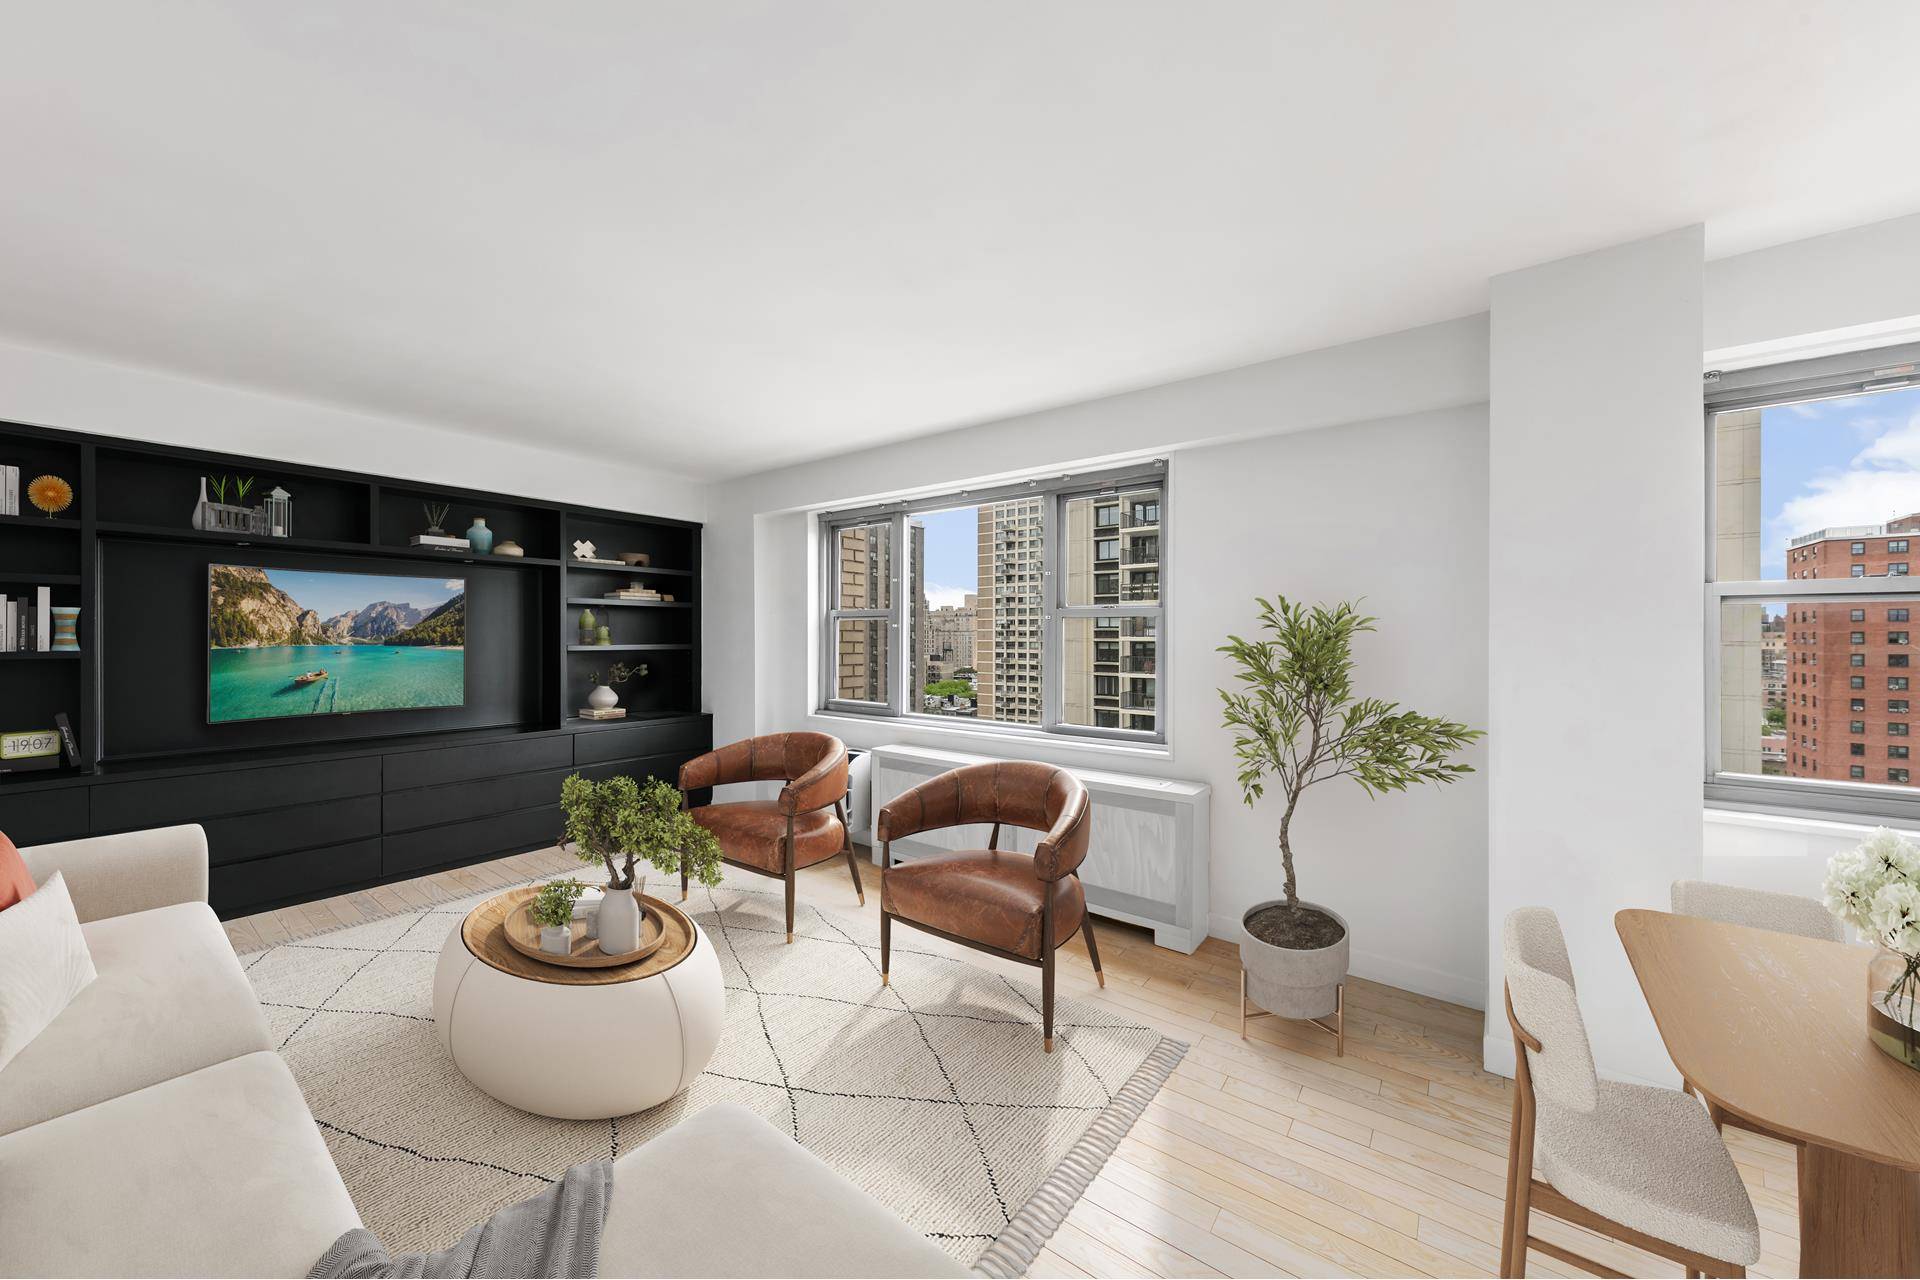 100 West 93rd Street is the essence of sophisticated, condo living on the Upper West Side.